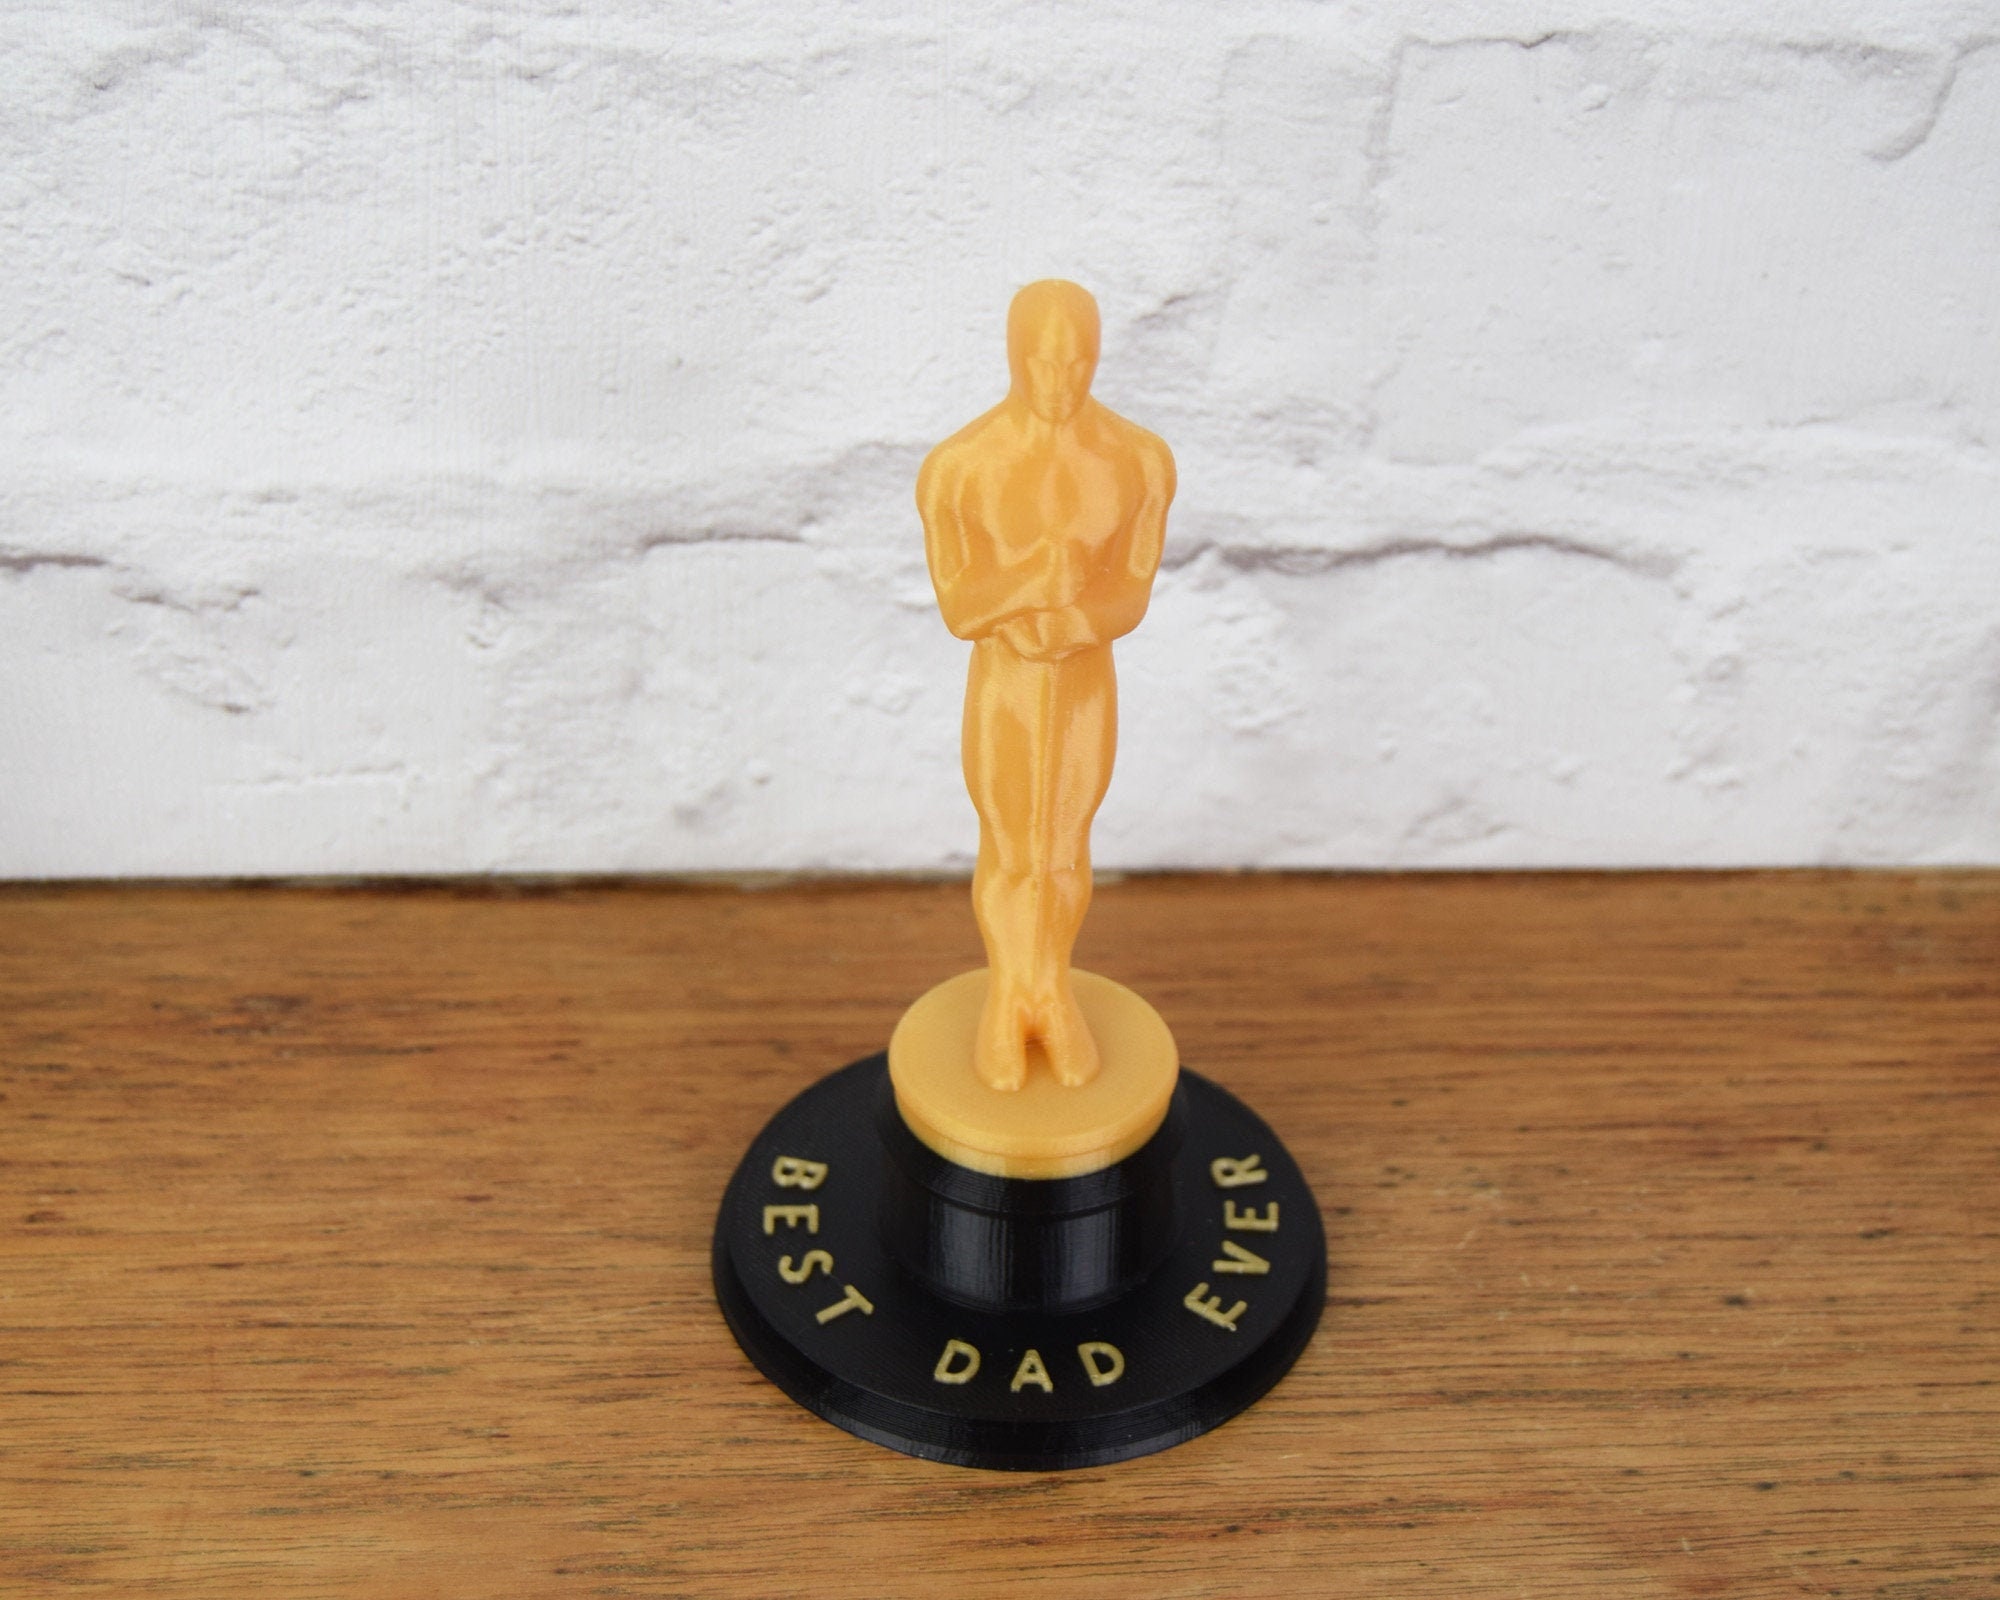 Personalized Oscar Award Funny Oscar Award Gift Corporate Gifts Make Your Own Awards Birthday Gift Custom Oscar Prize Gift for her him